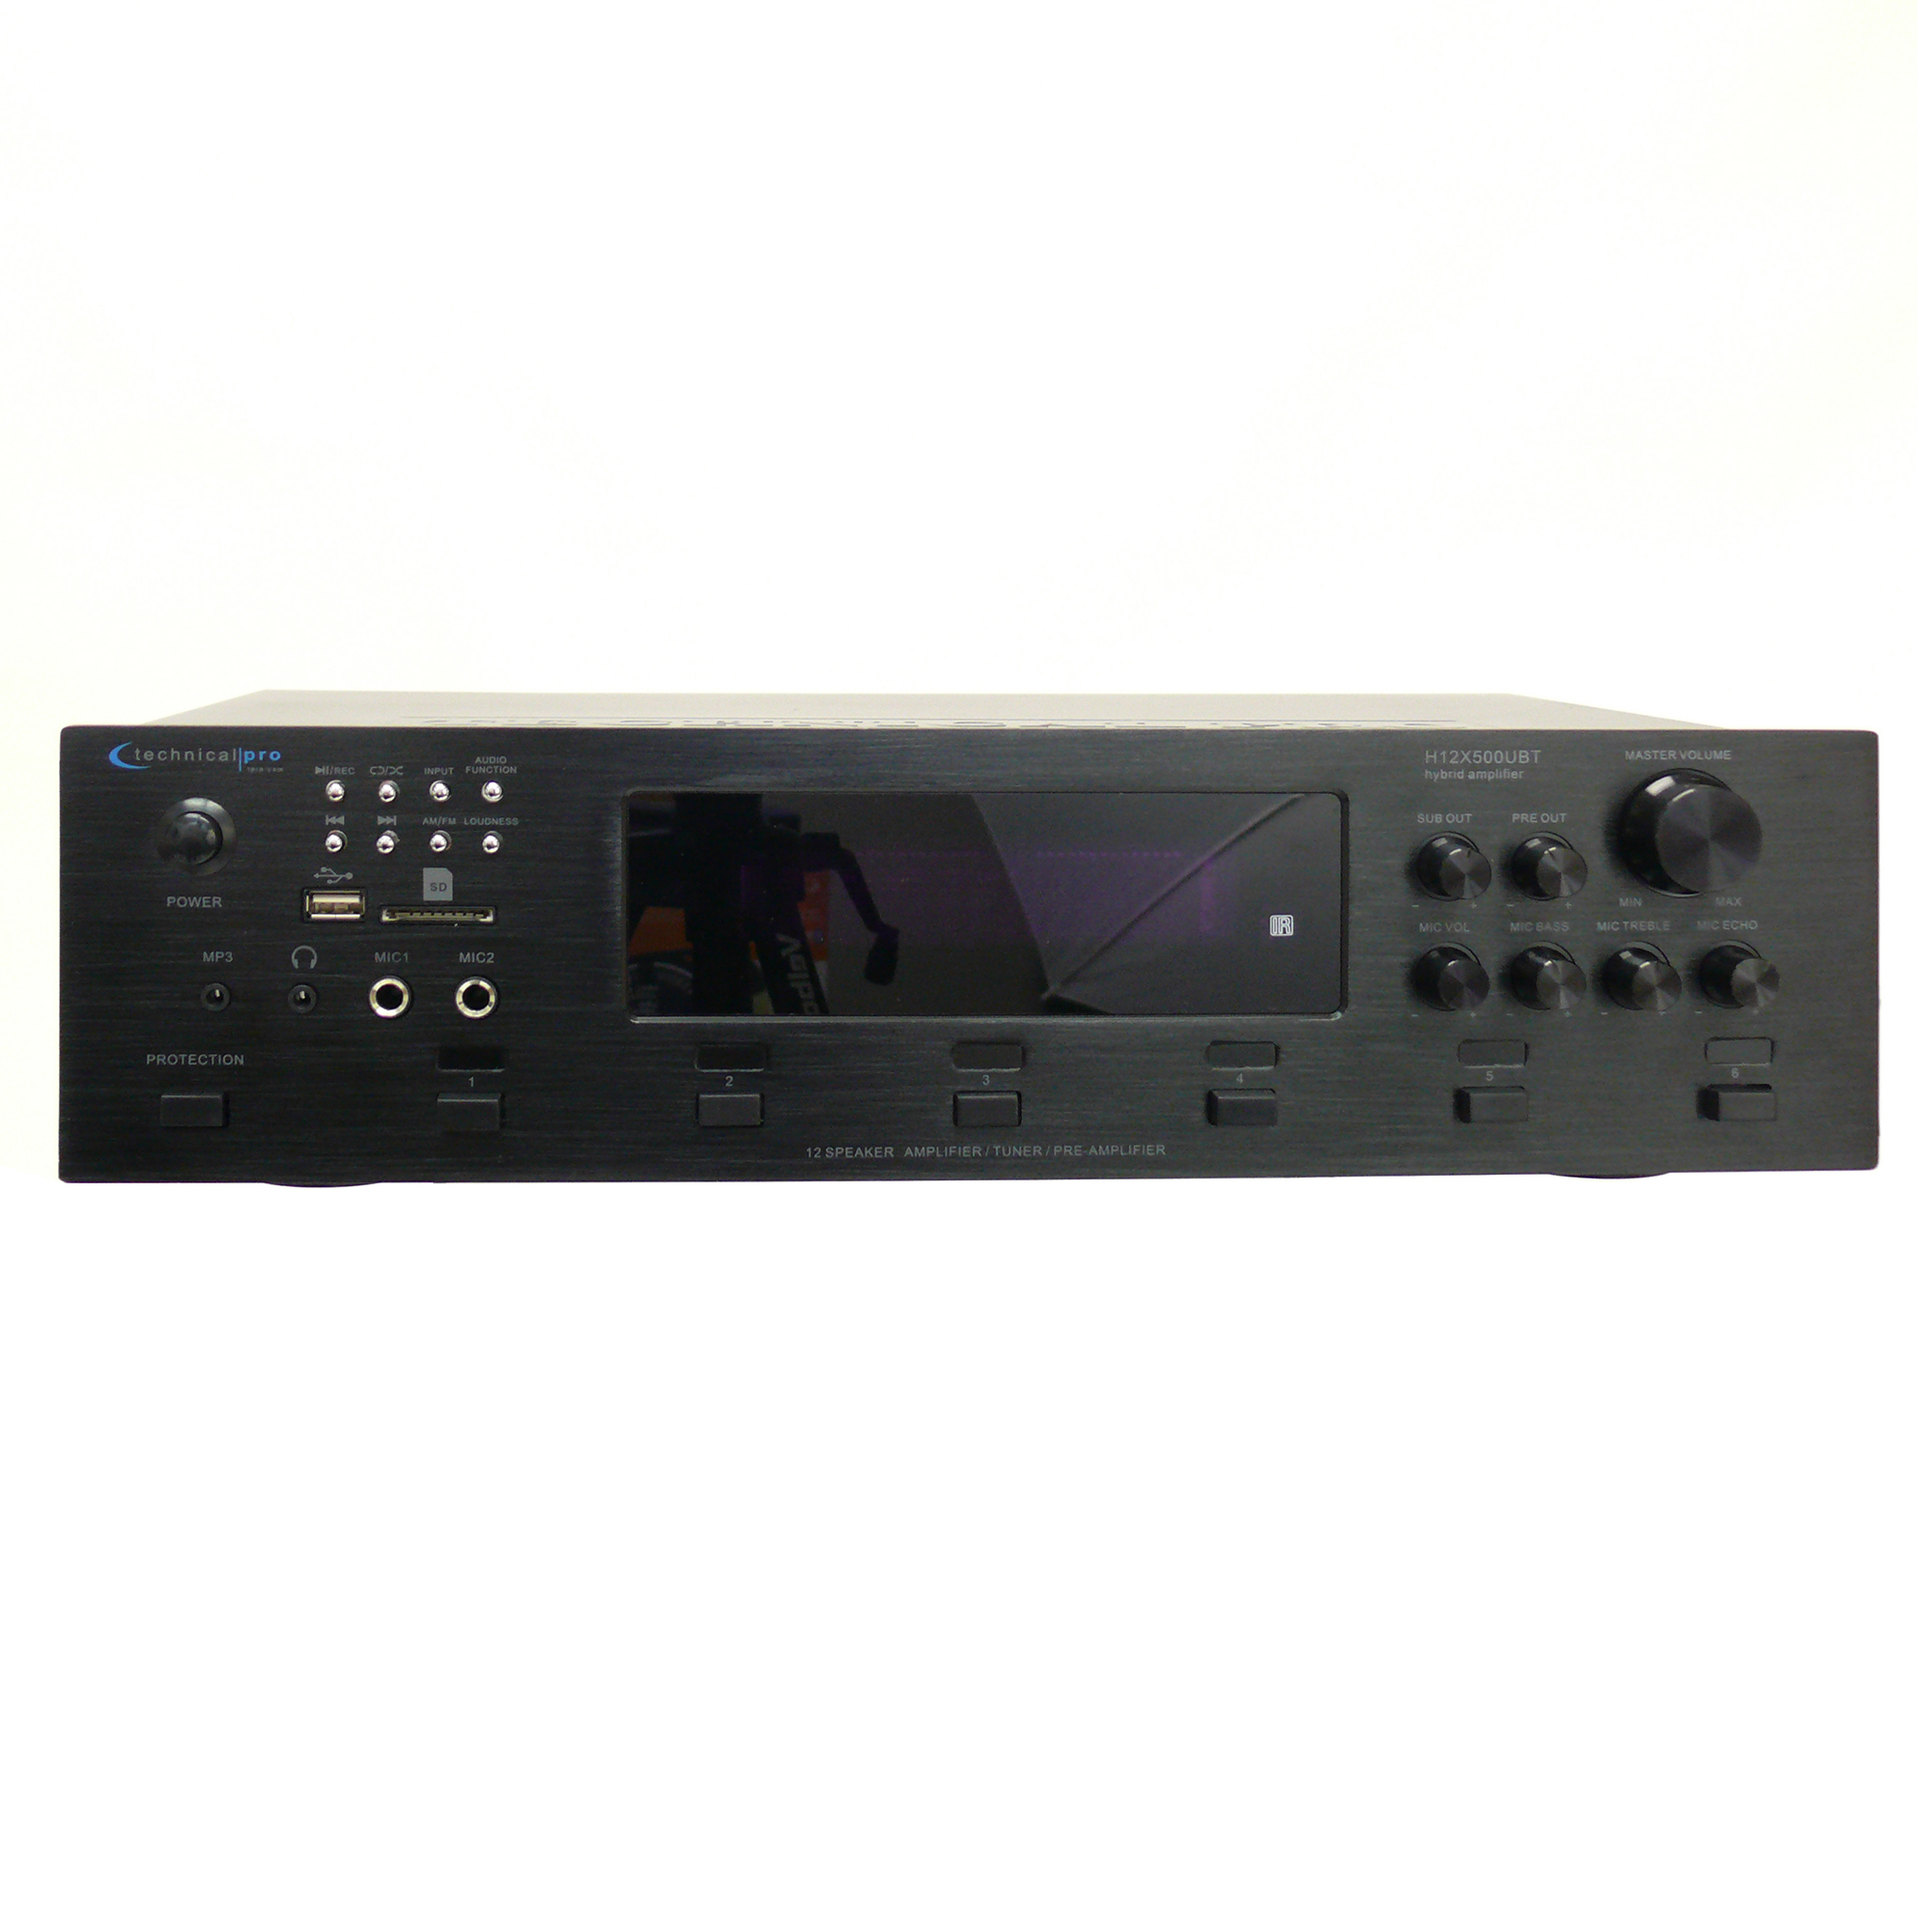 Technical Pro 6 Zone 6000 Watts Digital Bluetooth Hybrid Amplifier Preamp Tuner W/ Speaker USB And SD Card Output, 2 Mic Inputs